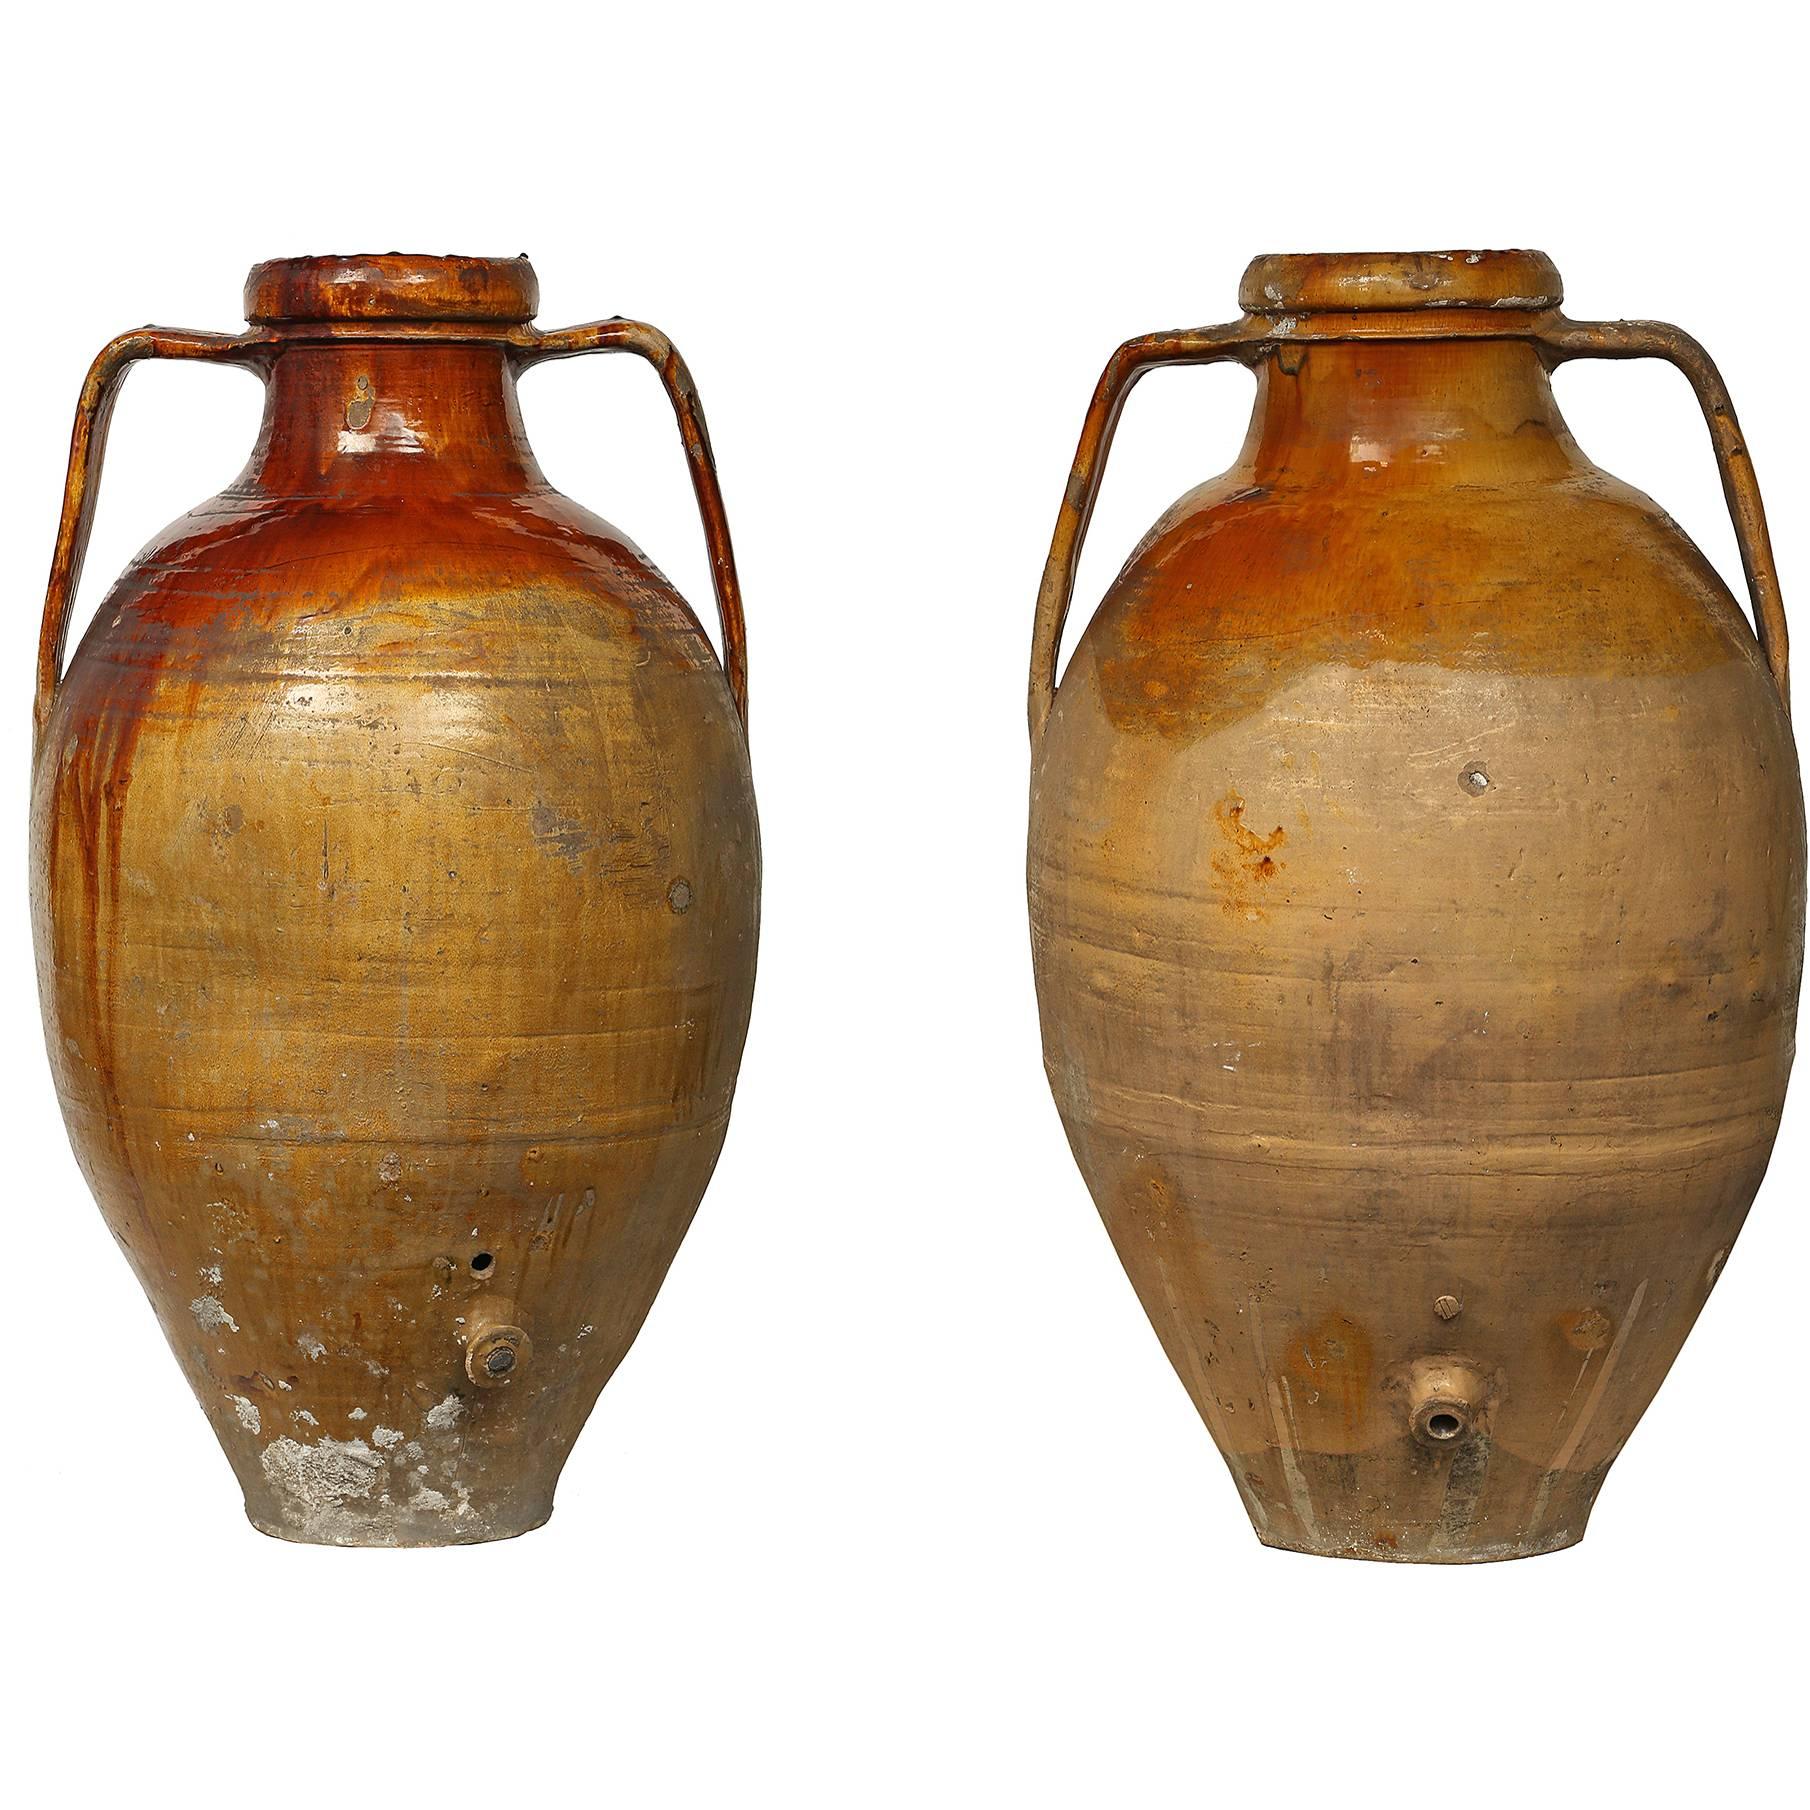 Pair of Italian 19th Century Glazed Terra Cotta Urns with Spouts